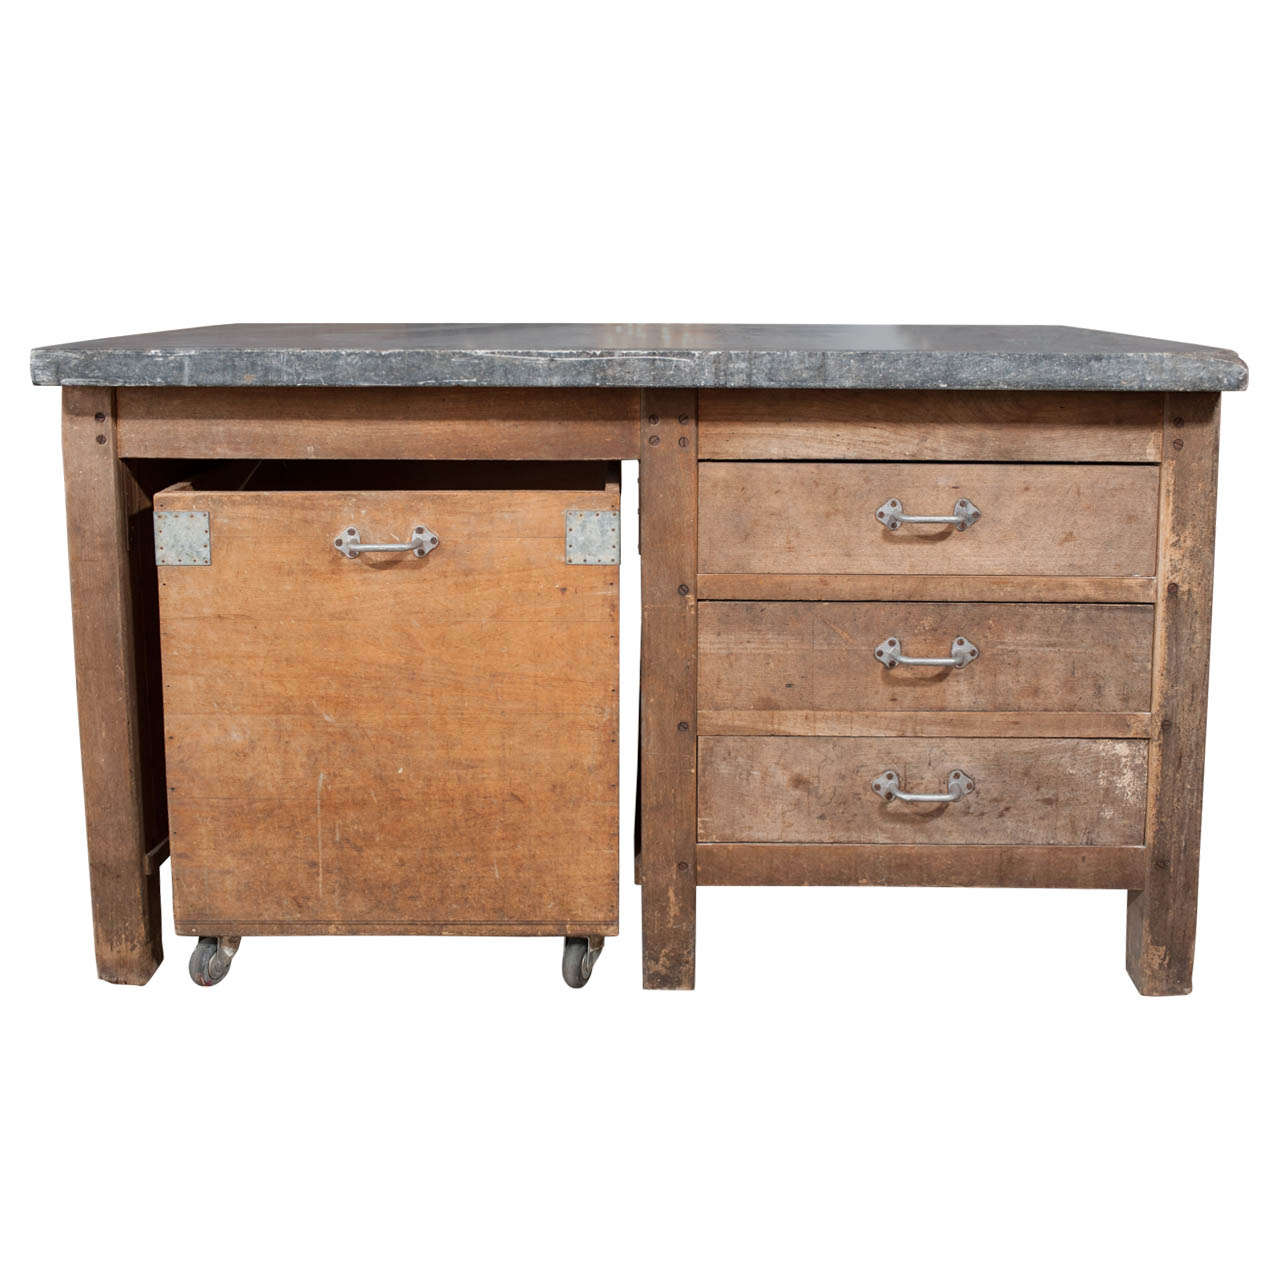 Early 20th Century Wooden Bakers Counter For Sale